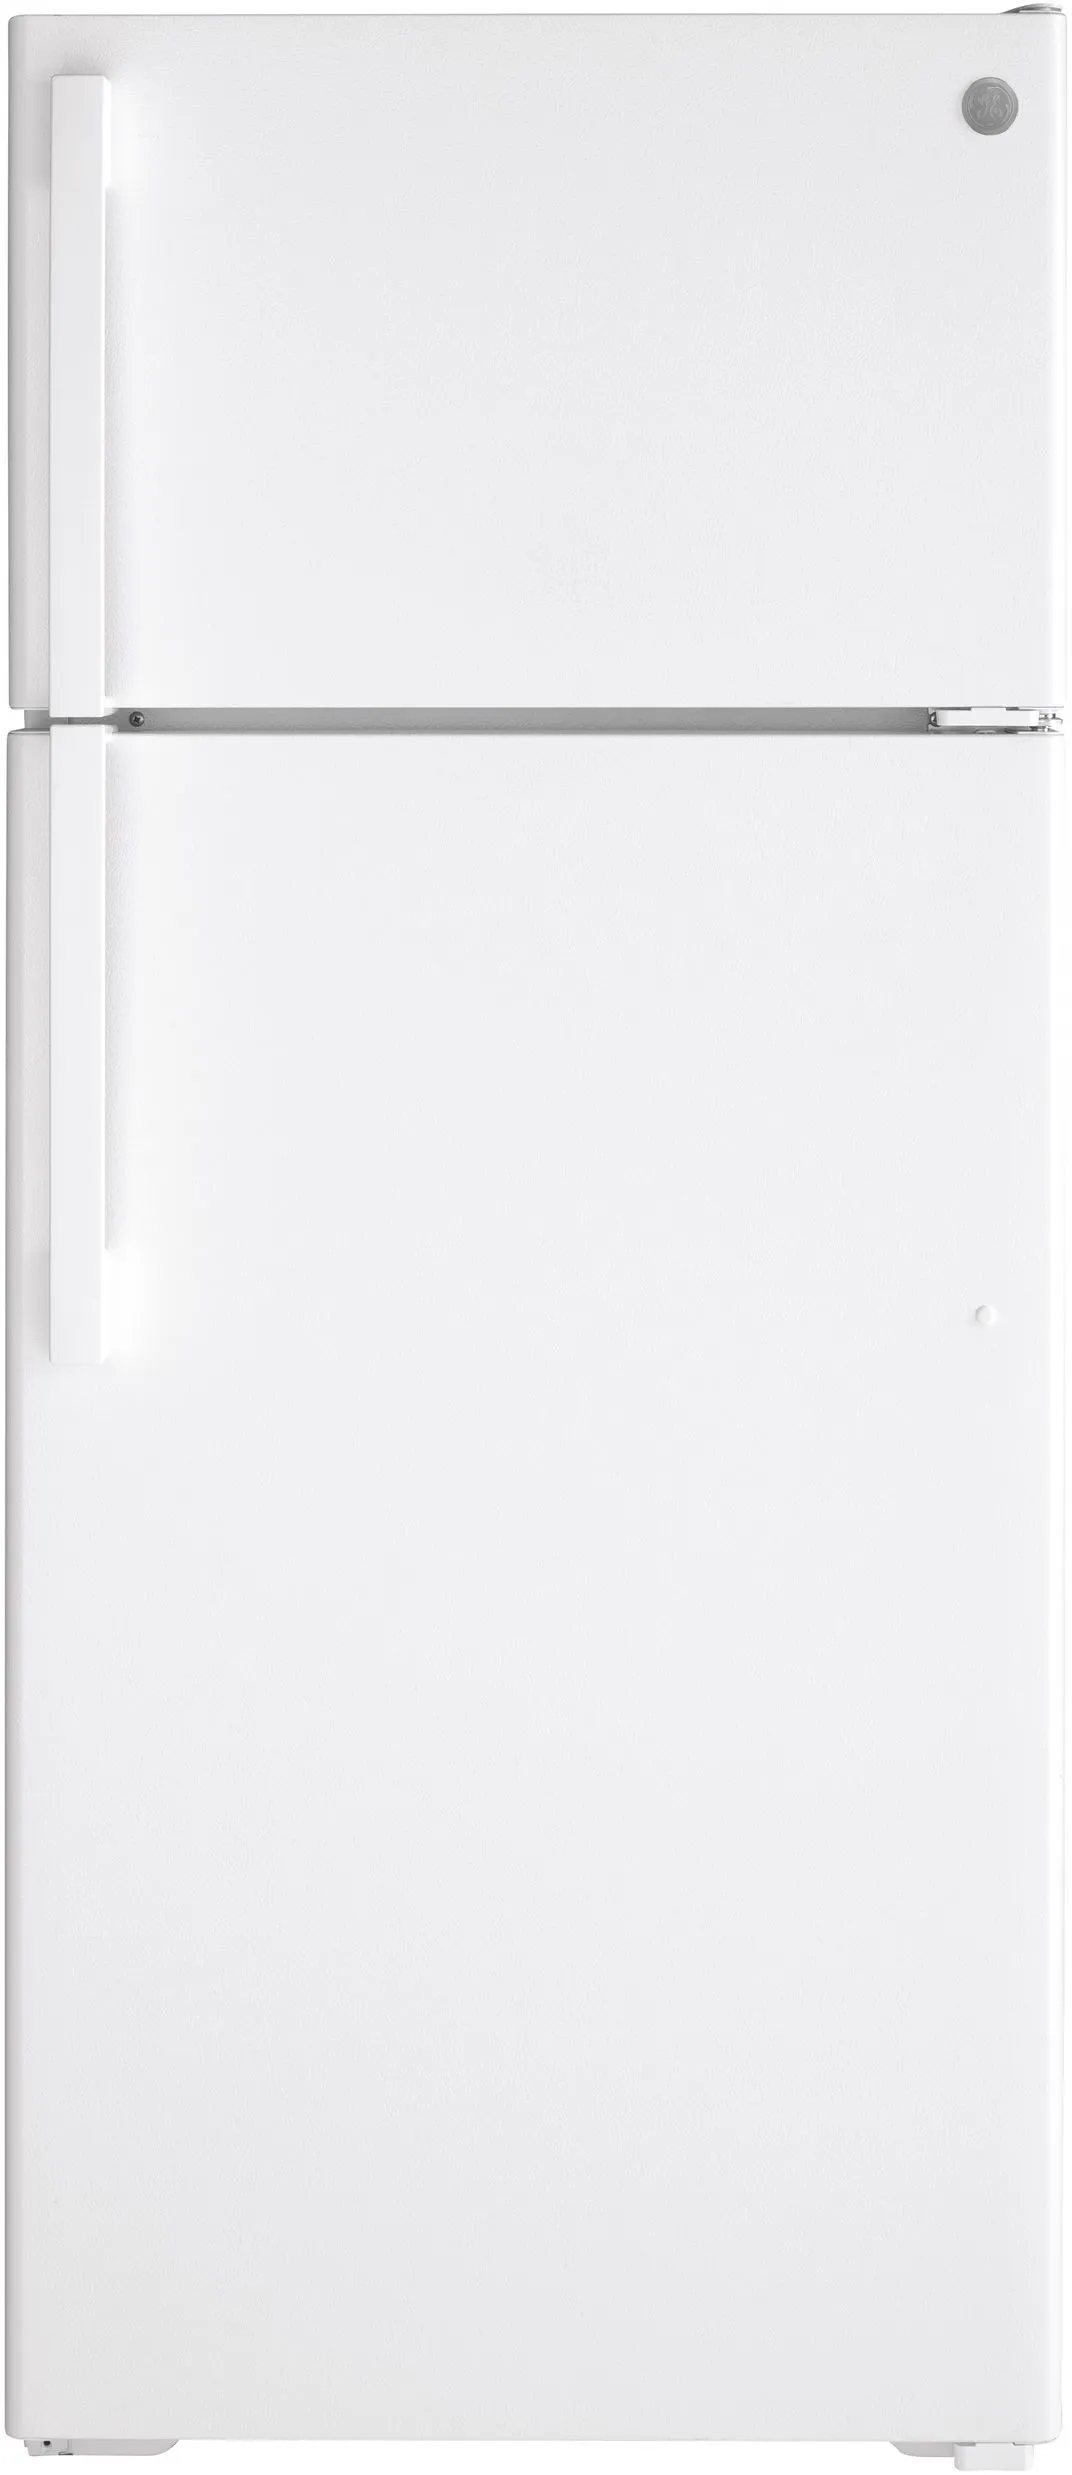 Front view of GE GIE18DTNRWW top freezer refrigerator with an internal ice maker